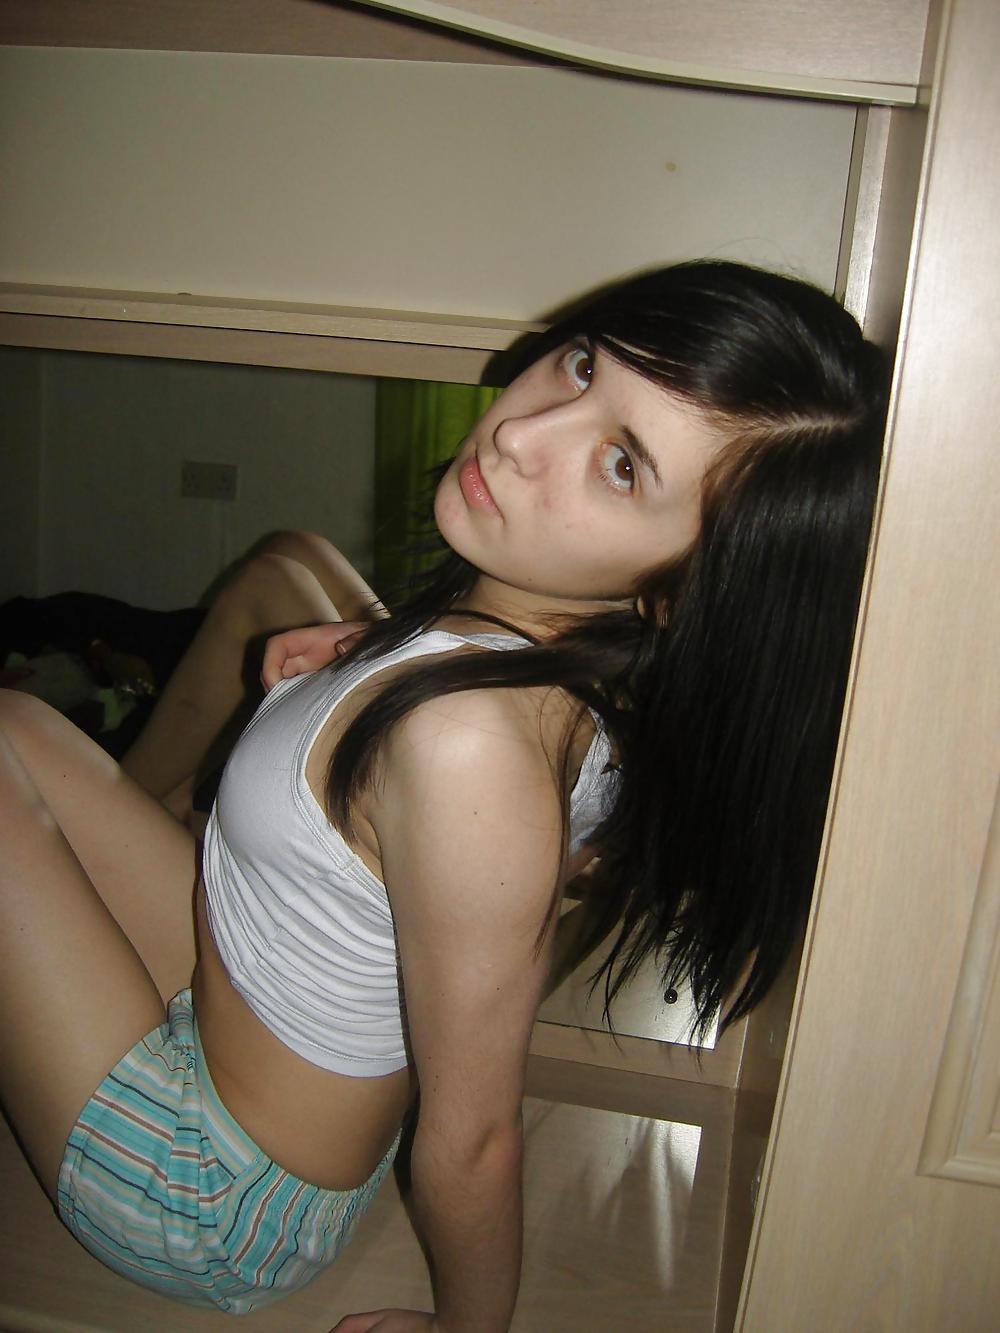 Very sexy young British Amateur girl 002 adult photos